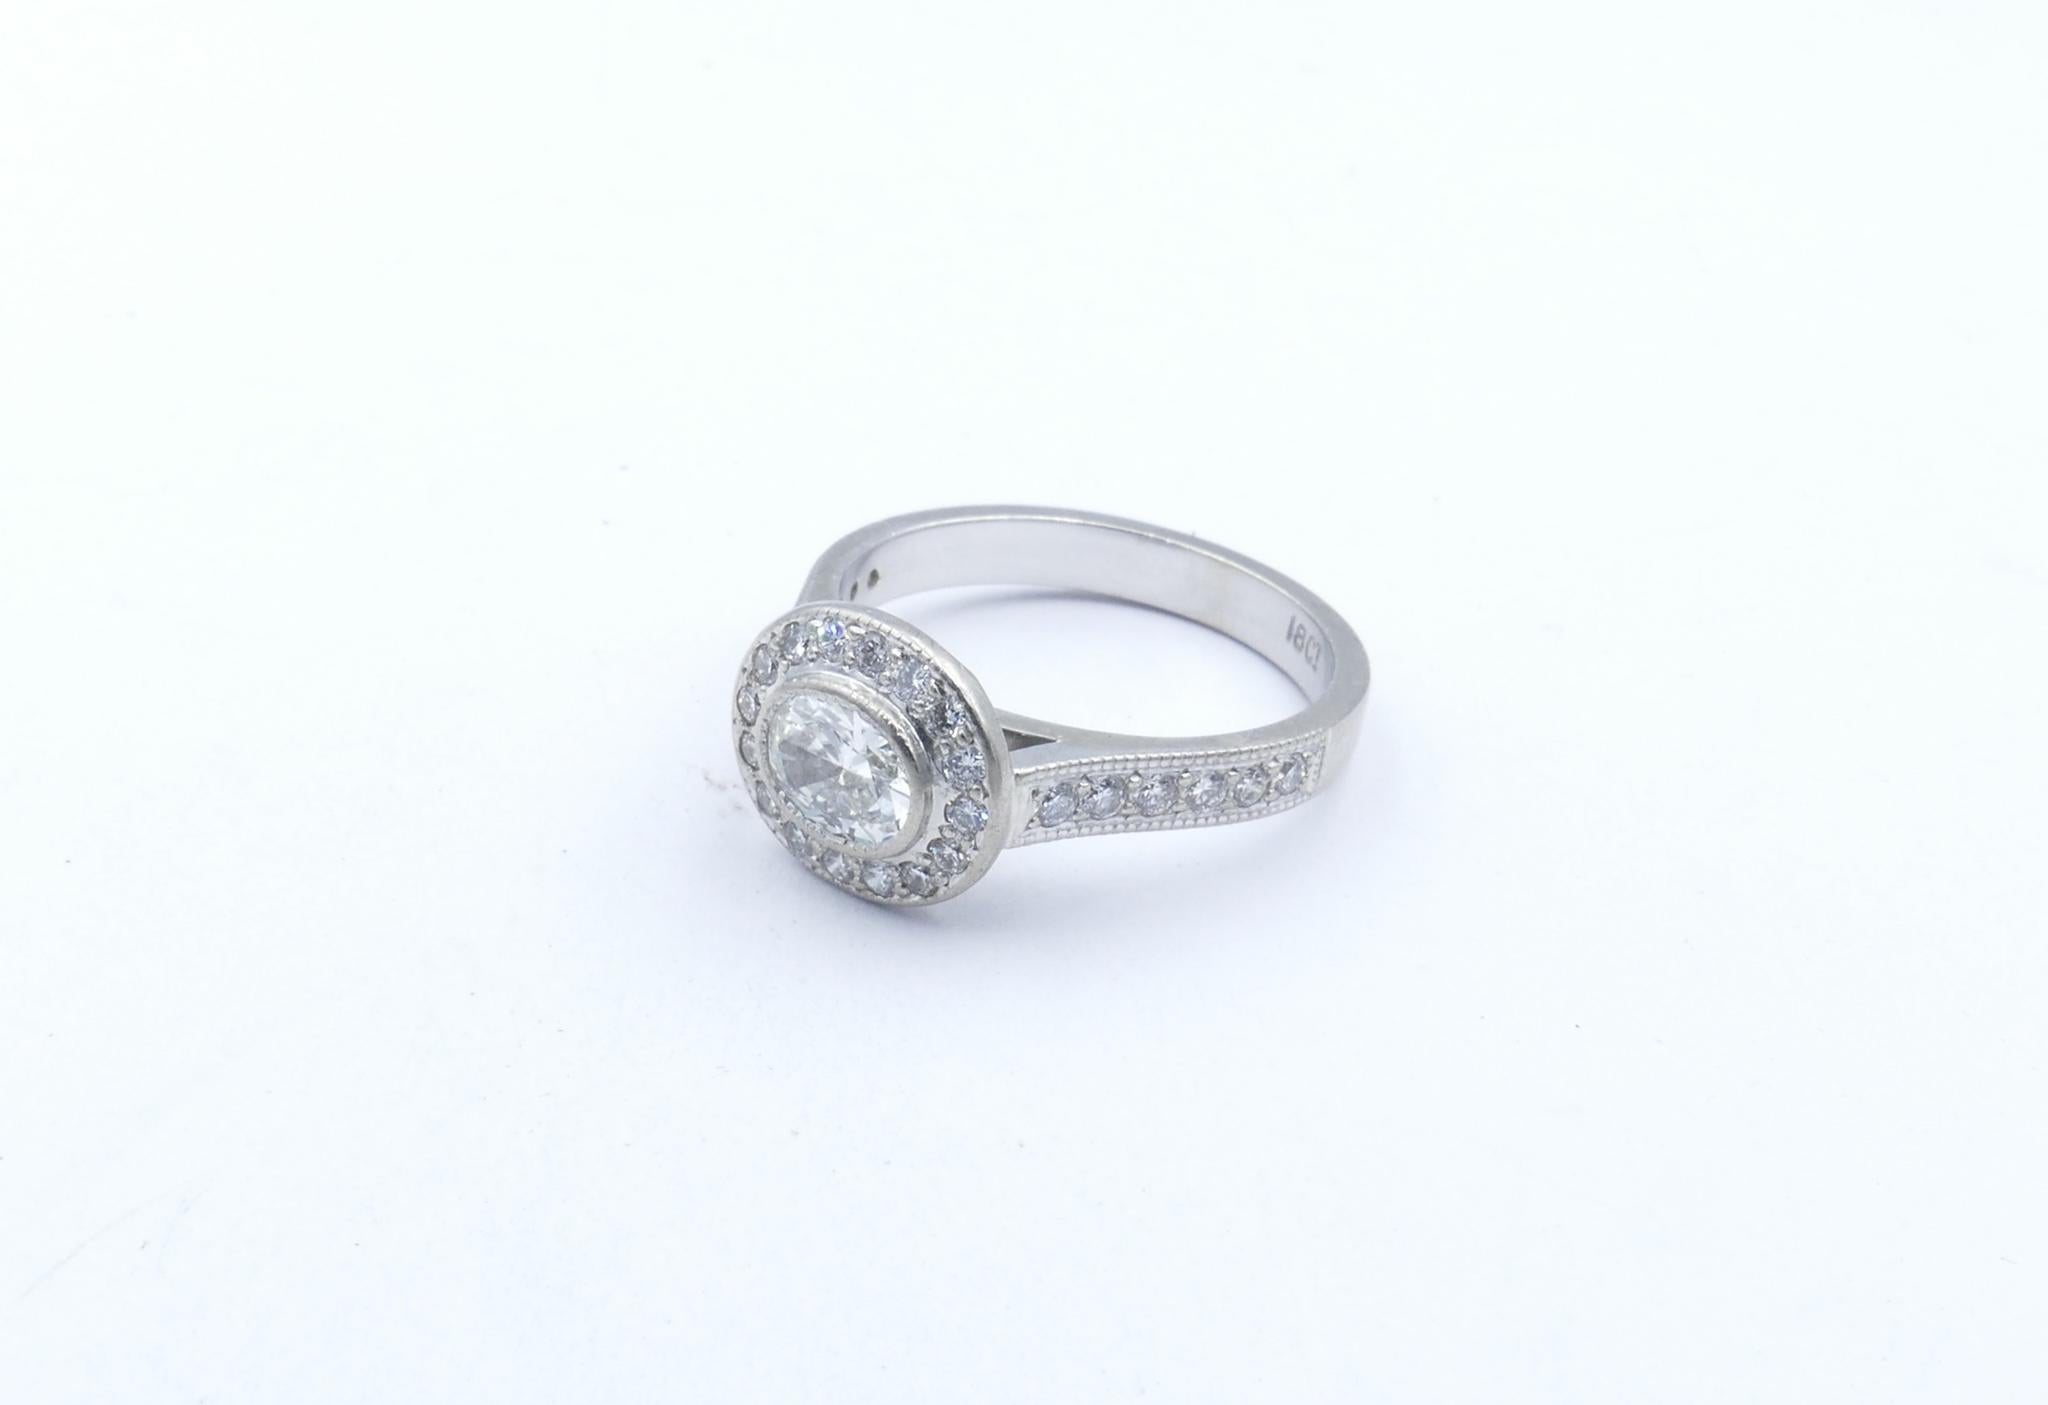 This Ring features a central Oval Cut Diamond of 3 quarters of a Carat, G/H Colour, Si1 Clarity.
28 Round Brilliant Cut Diamonds weight 0.4 Carat and the same high quality, are set around the Centre Stone & in the shoulders of the Ring. 
Finger Size